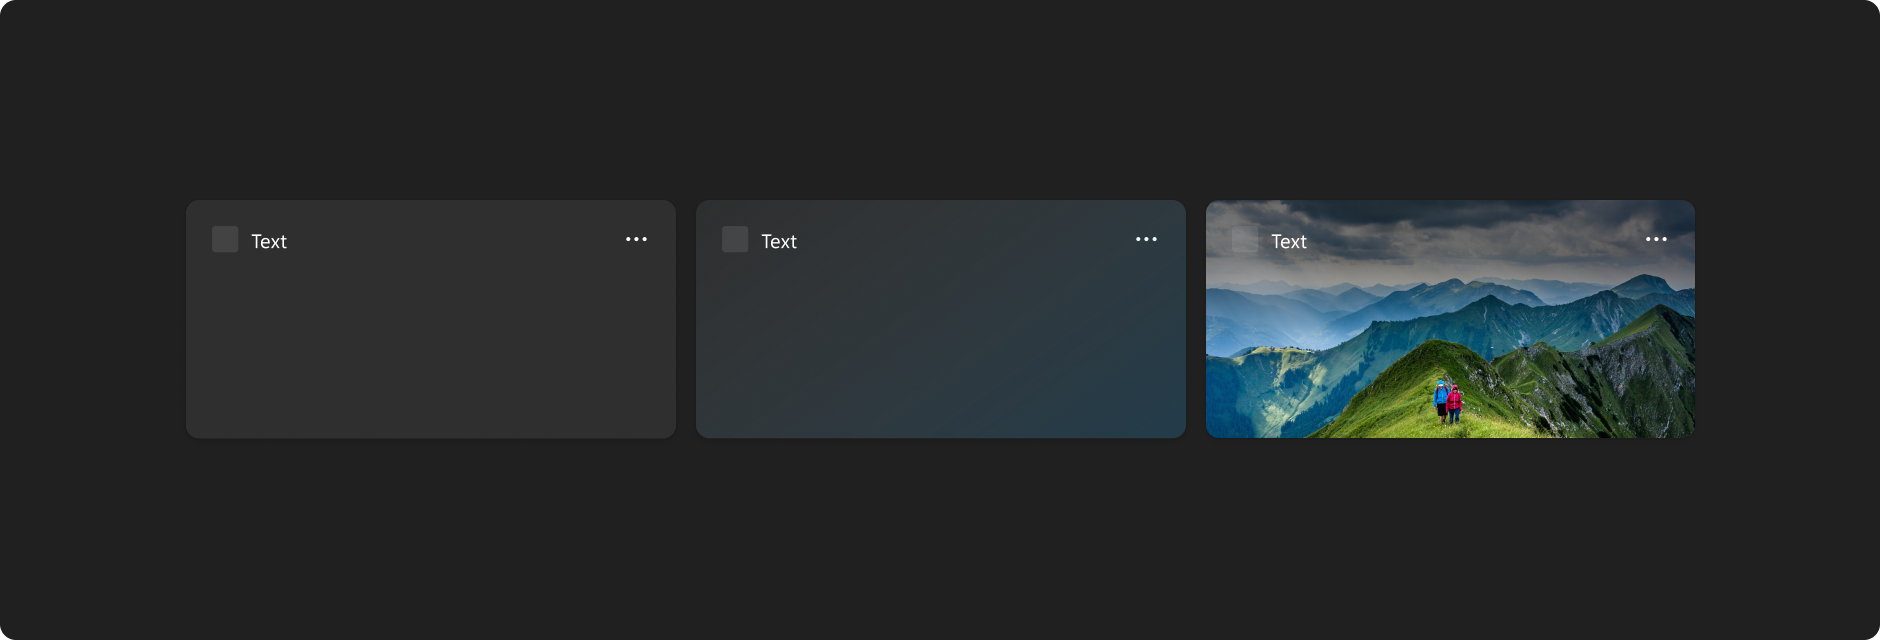 Three example widget templates demonstrating the dark theme. The first is an empty widget with a black backgroud. The second is an empty widget with a dark gradient background. The third is a widget with an image background. All three have the word "text" in a light font to demonstrate the contrast with the dark background.